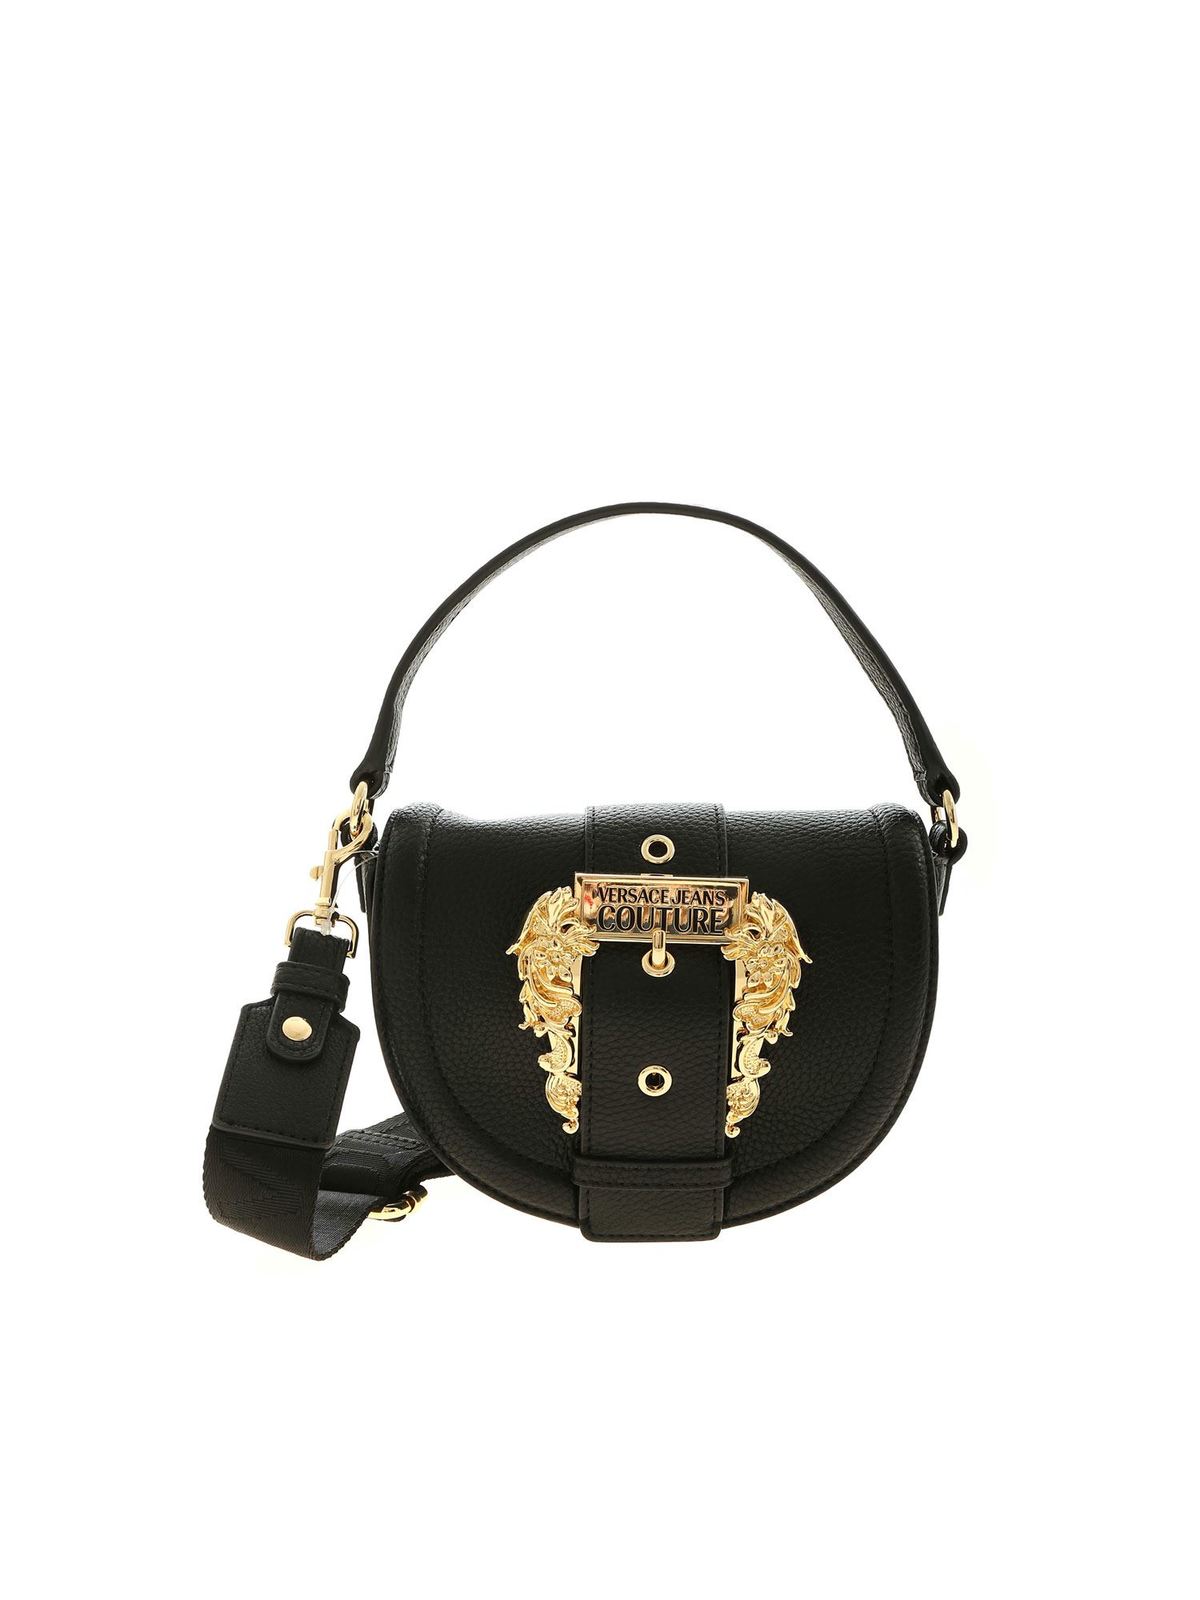 Cross body bags Versace Jeans Couture - Couture handbag in black